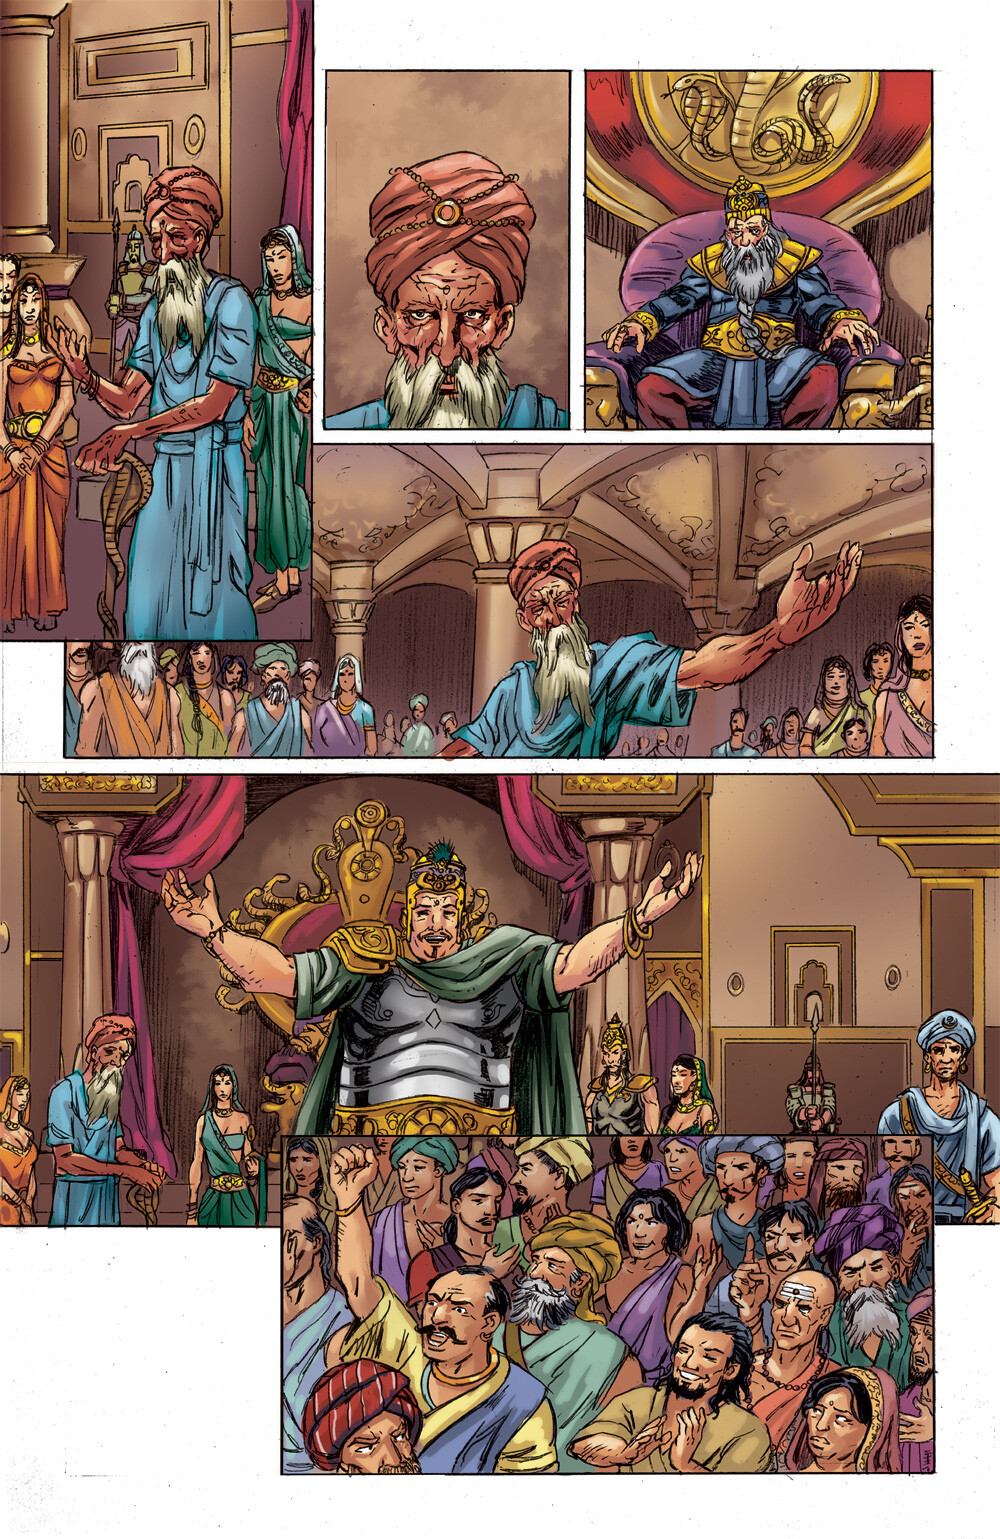 Scions of the Cursed King #2
Page 20, color by Vivek Goel